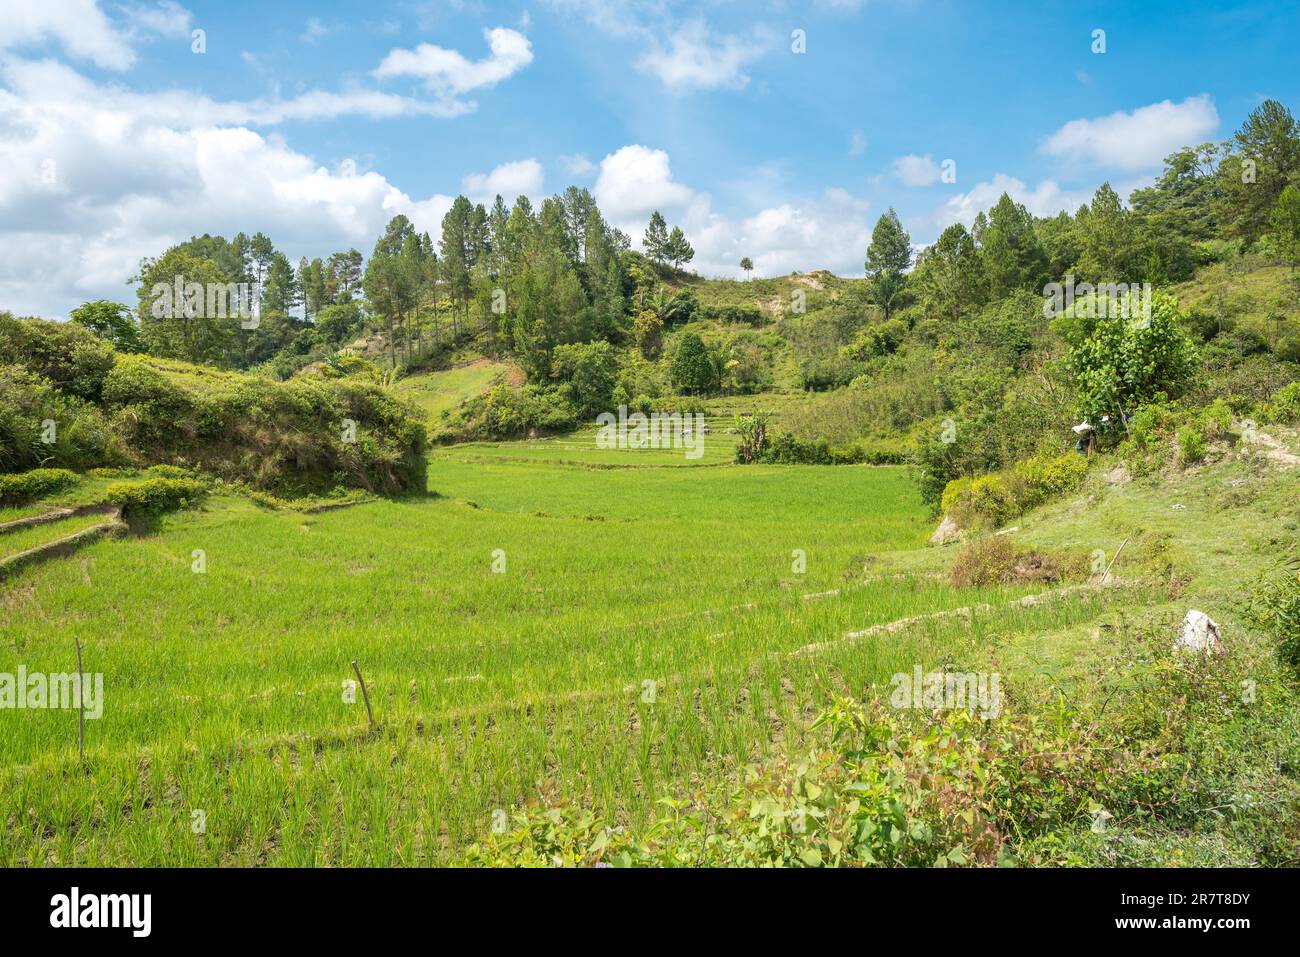 Paddy fields on Samosir island. The mountainous island within the Lake Toba in North Sumatra province, is mainly cultivated by rice cultivation and Stock Photo